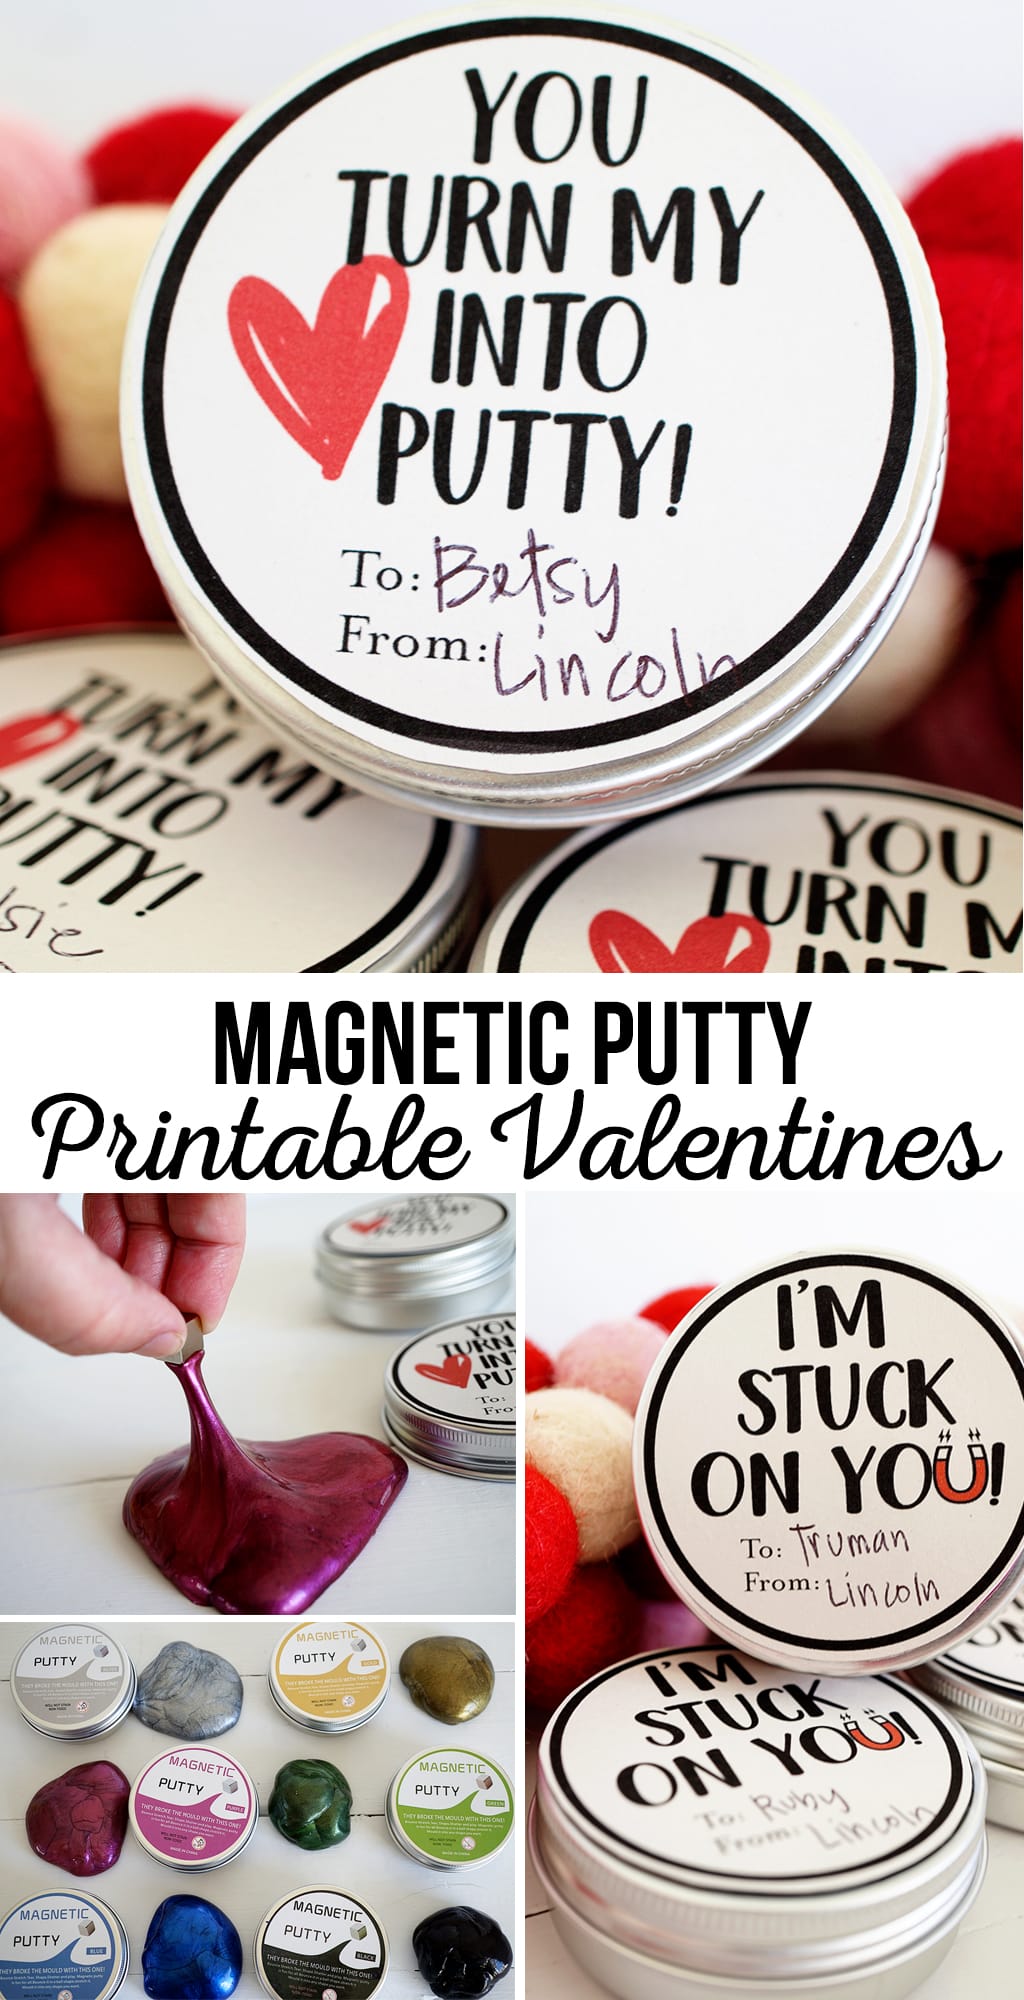 Magnetic Putty Printable Valentines